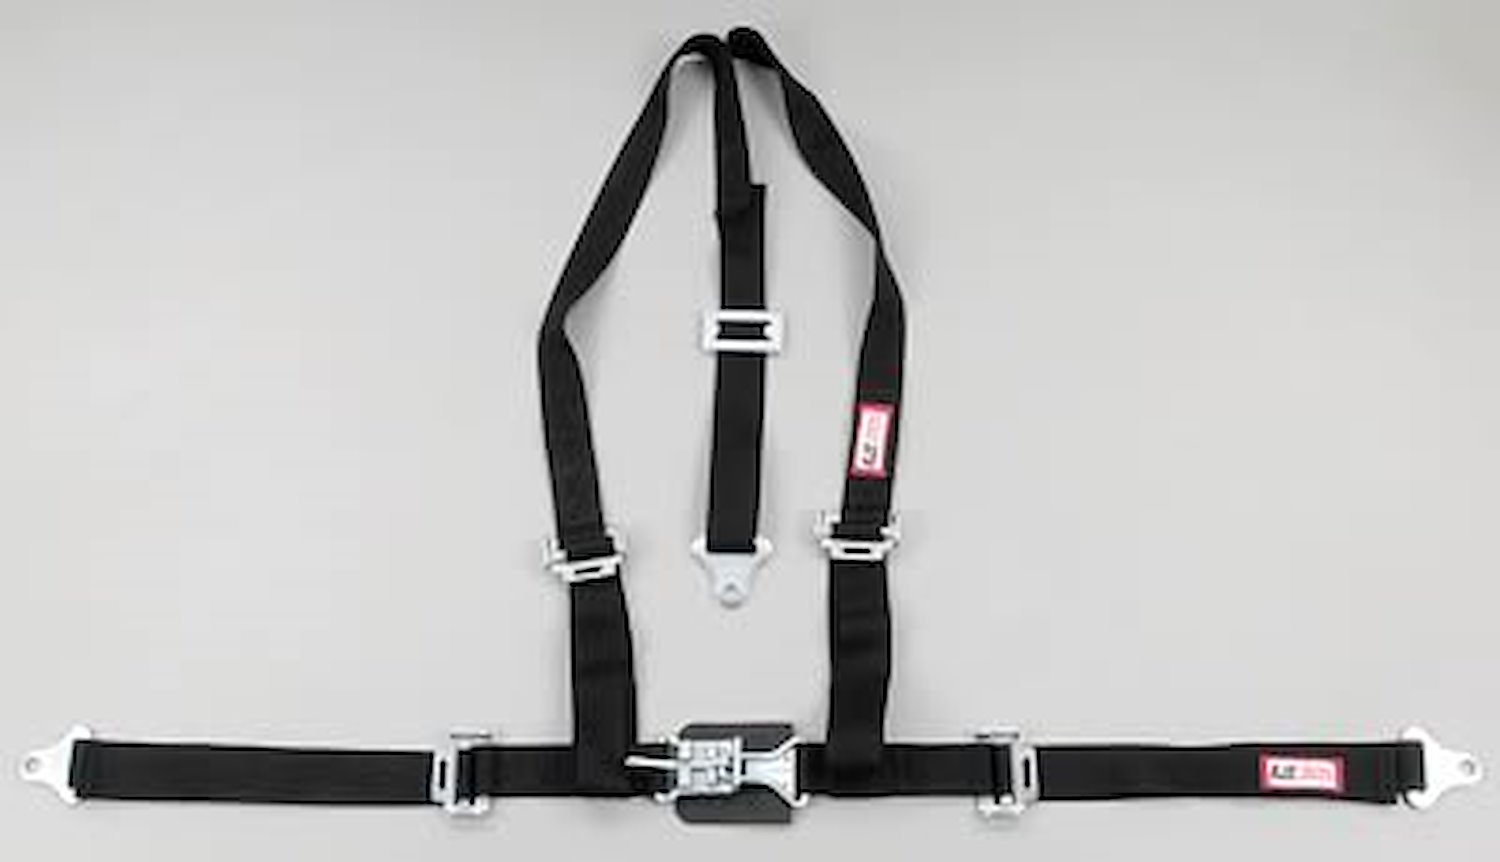 NON-SFI L&L HARNESS 3 PULL DOWN Lap Belt w/Adjuster SNAP 2 S.H. Y FLOOR Mount w/STERNUM STRAP WRAP/SNAP RED